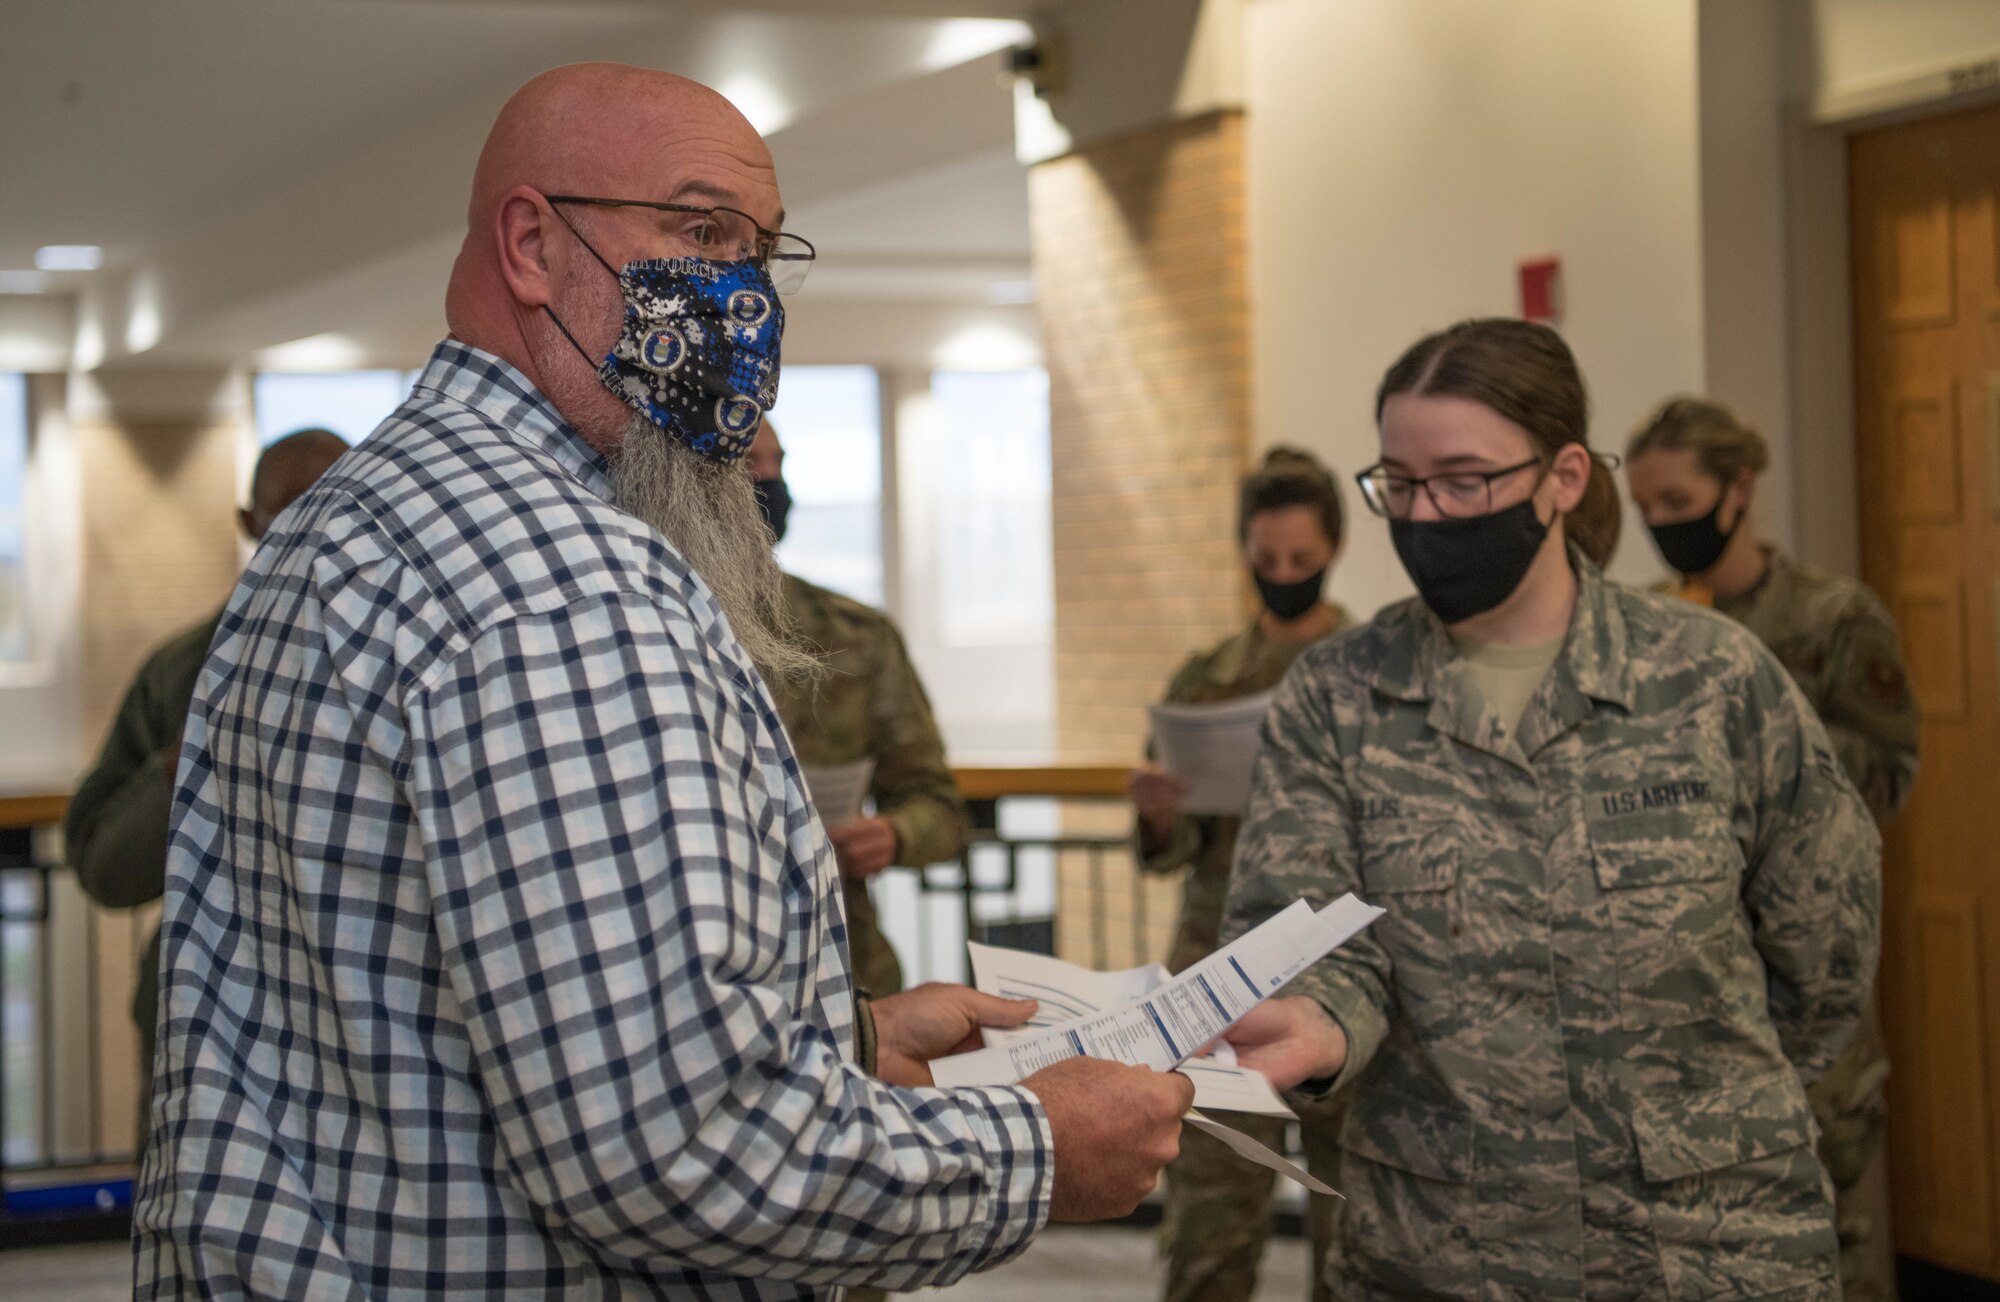 John Henry, 42nd Medical Group medical readiness flight chief, hands out travel itineraries to Airmen at the 42nd MDG at a deployment send-off on Maxwell Air Force Base, Ala. June 18, 2020. Airmen took their itineraries and received instructions from their leadership the day before their departure.